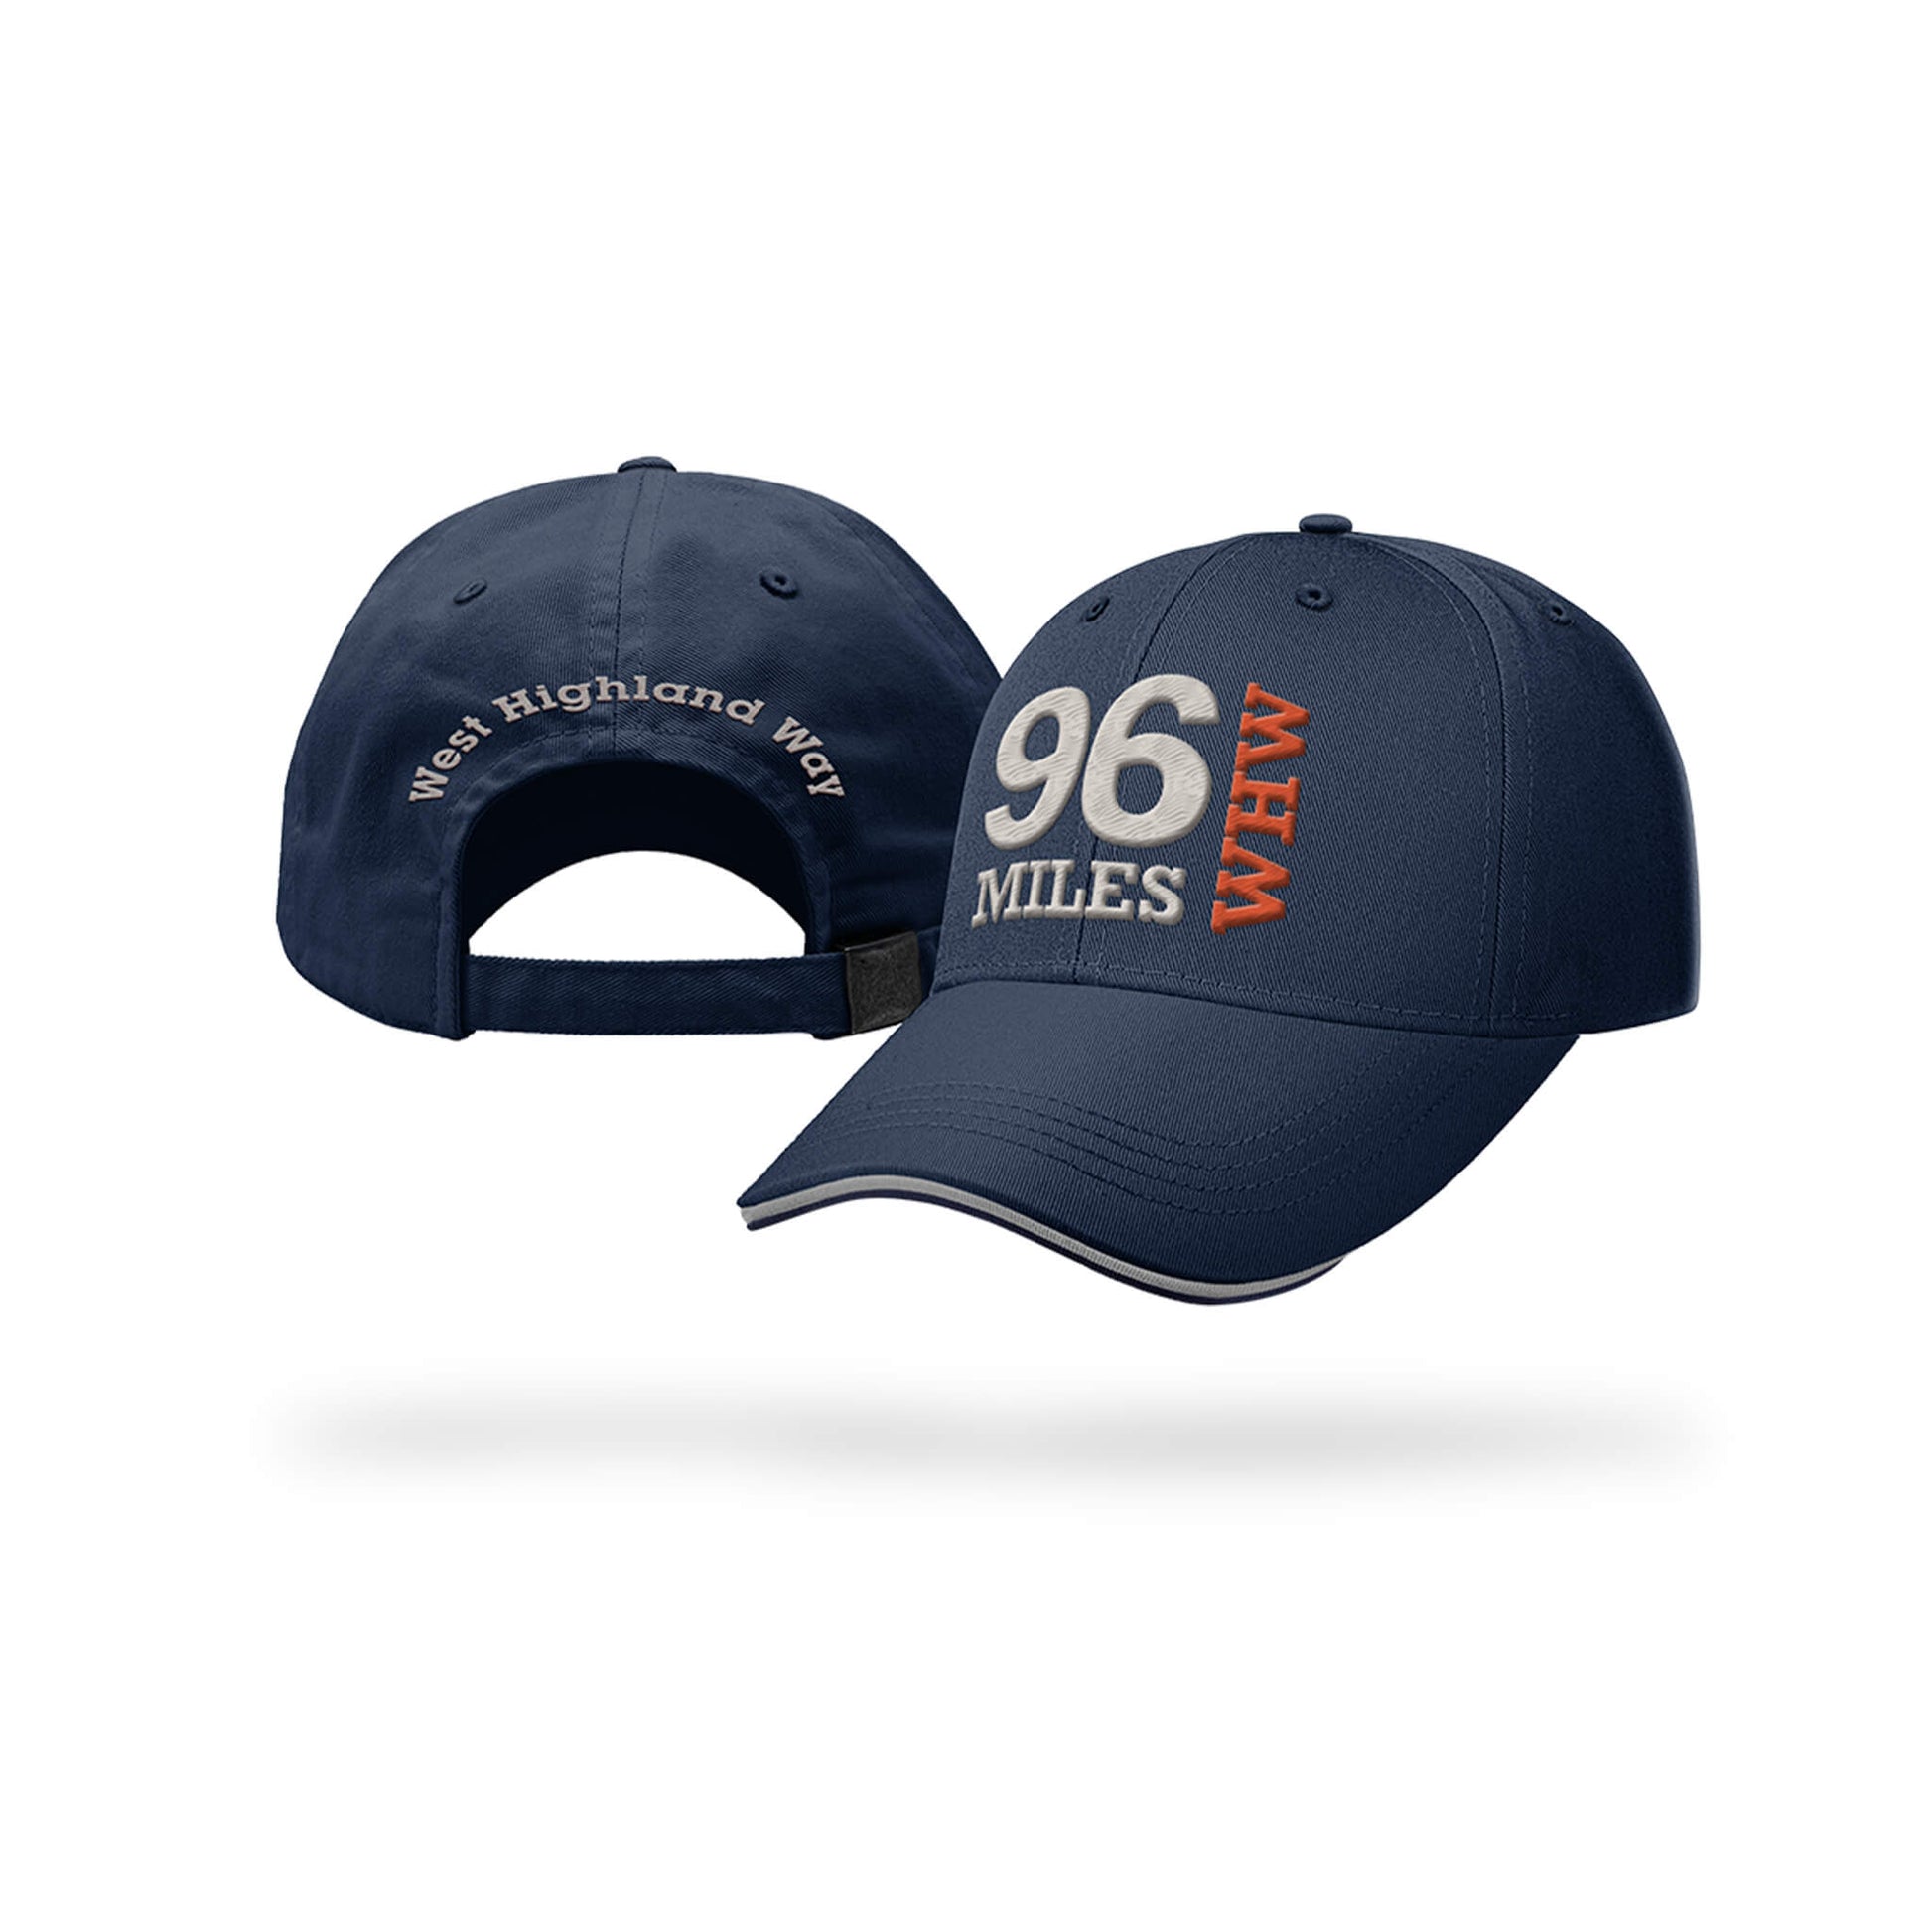 Navy West Highland Way 96 miles baseball caps shoeing front and back embroidery